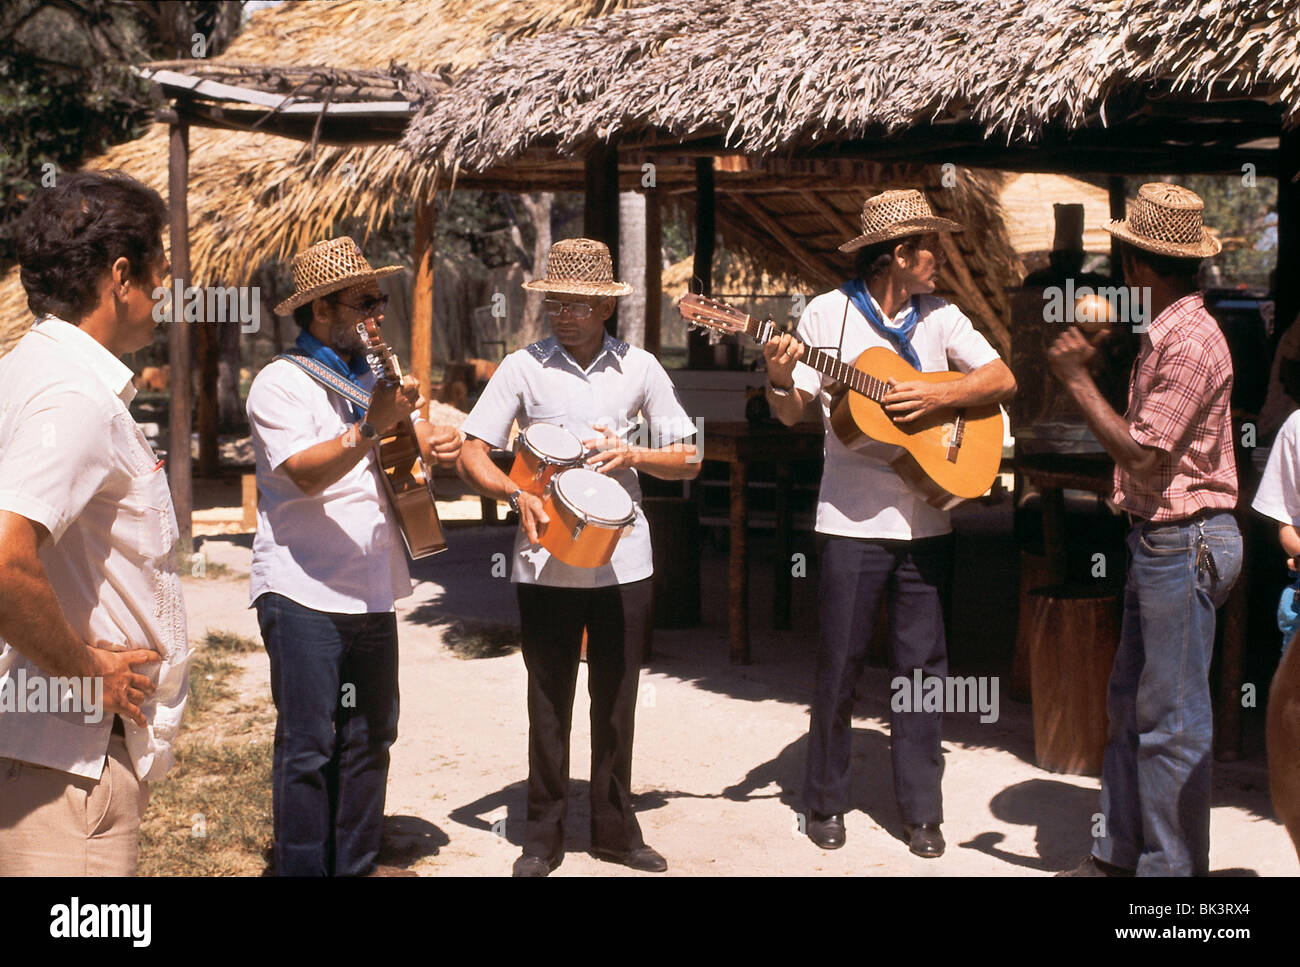 An all male quartet of musicians playing acoustic guitars, drums, and maracas for tourist entertainment in Cuba Stock Photo